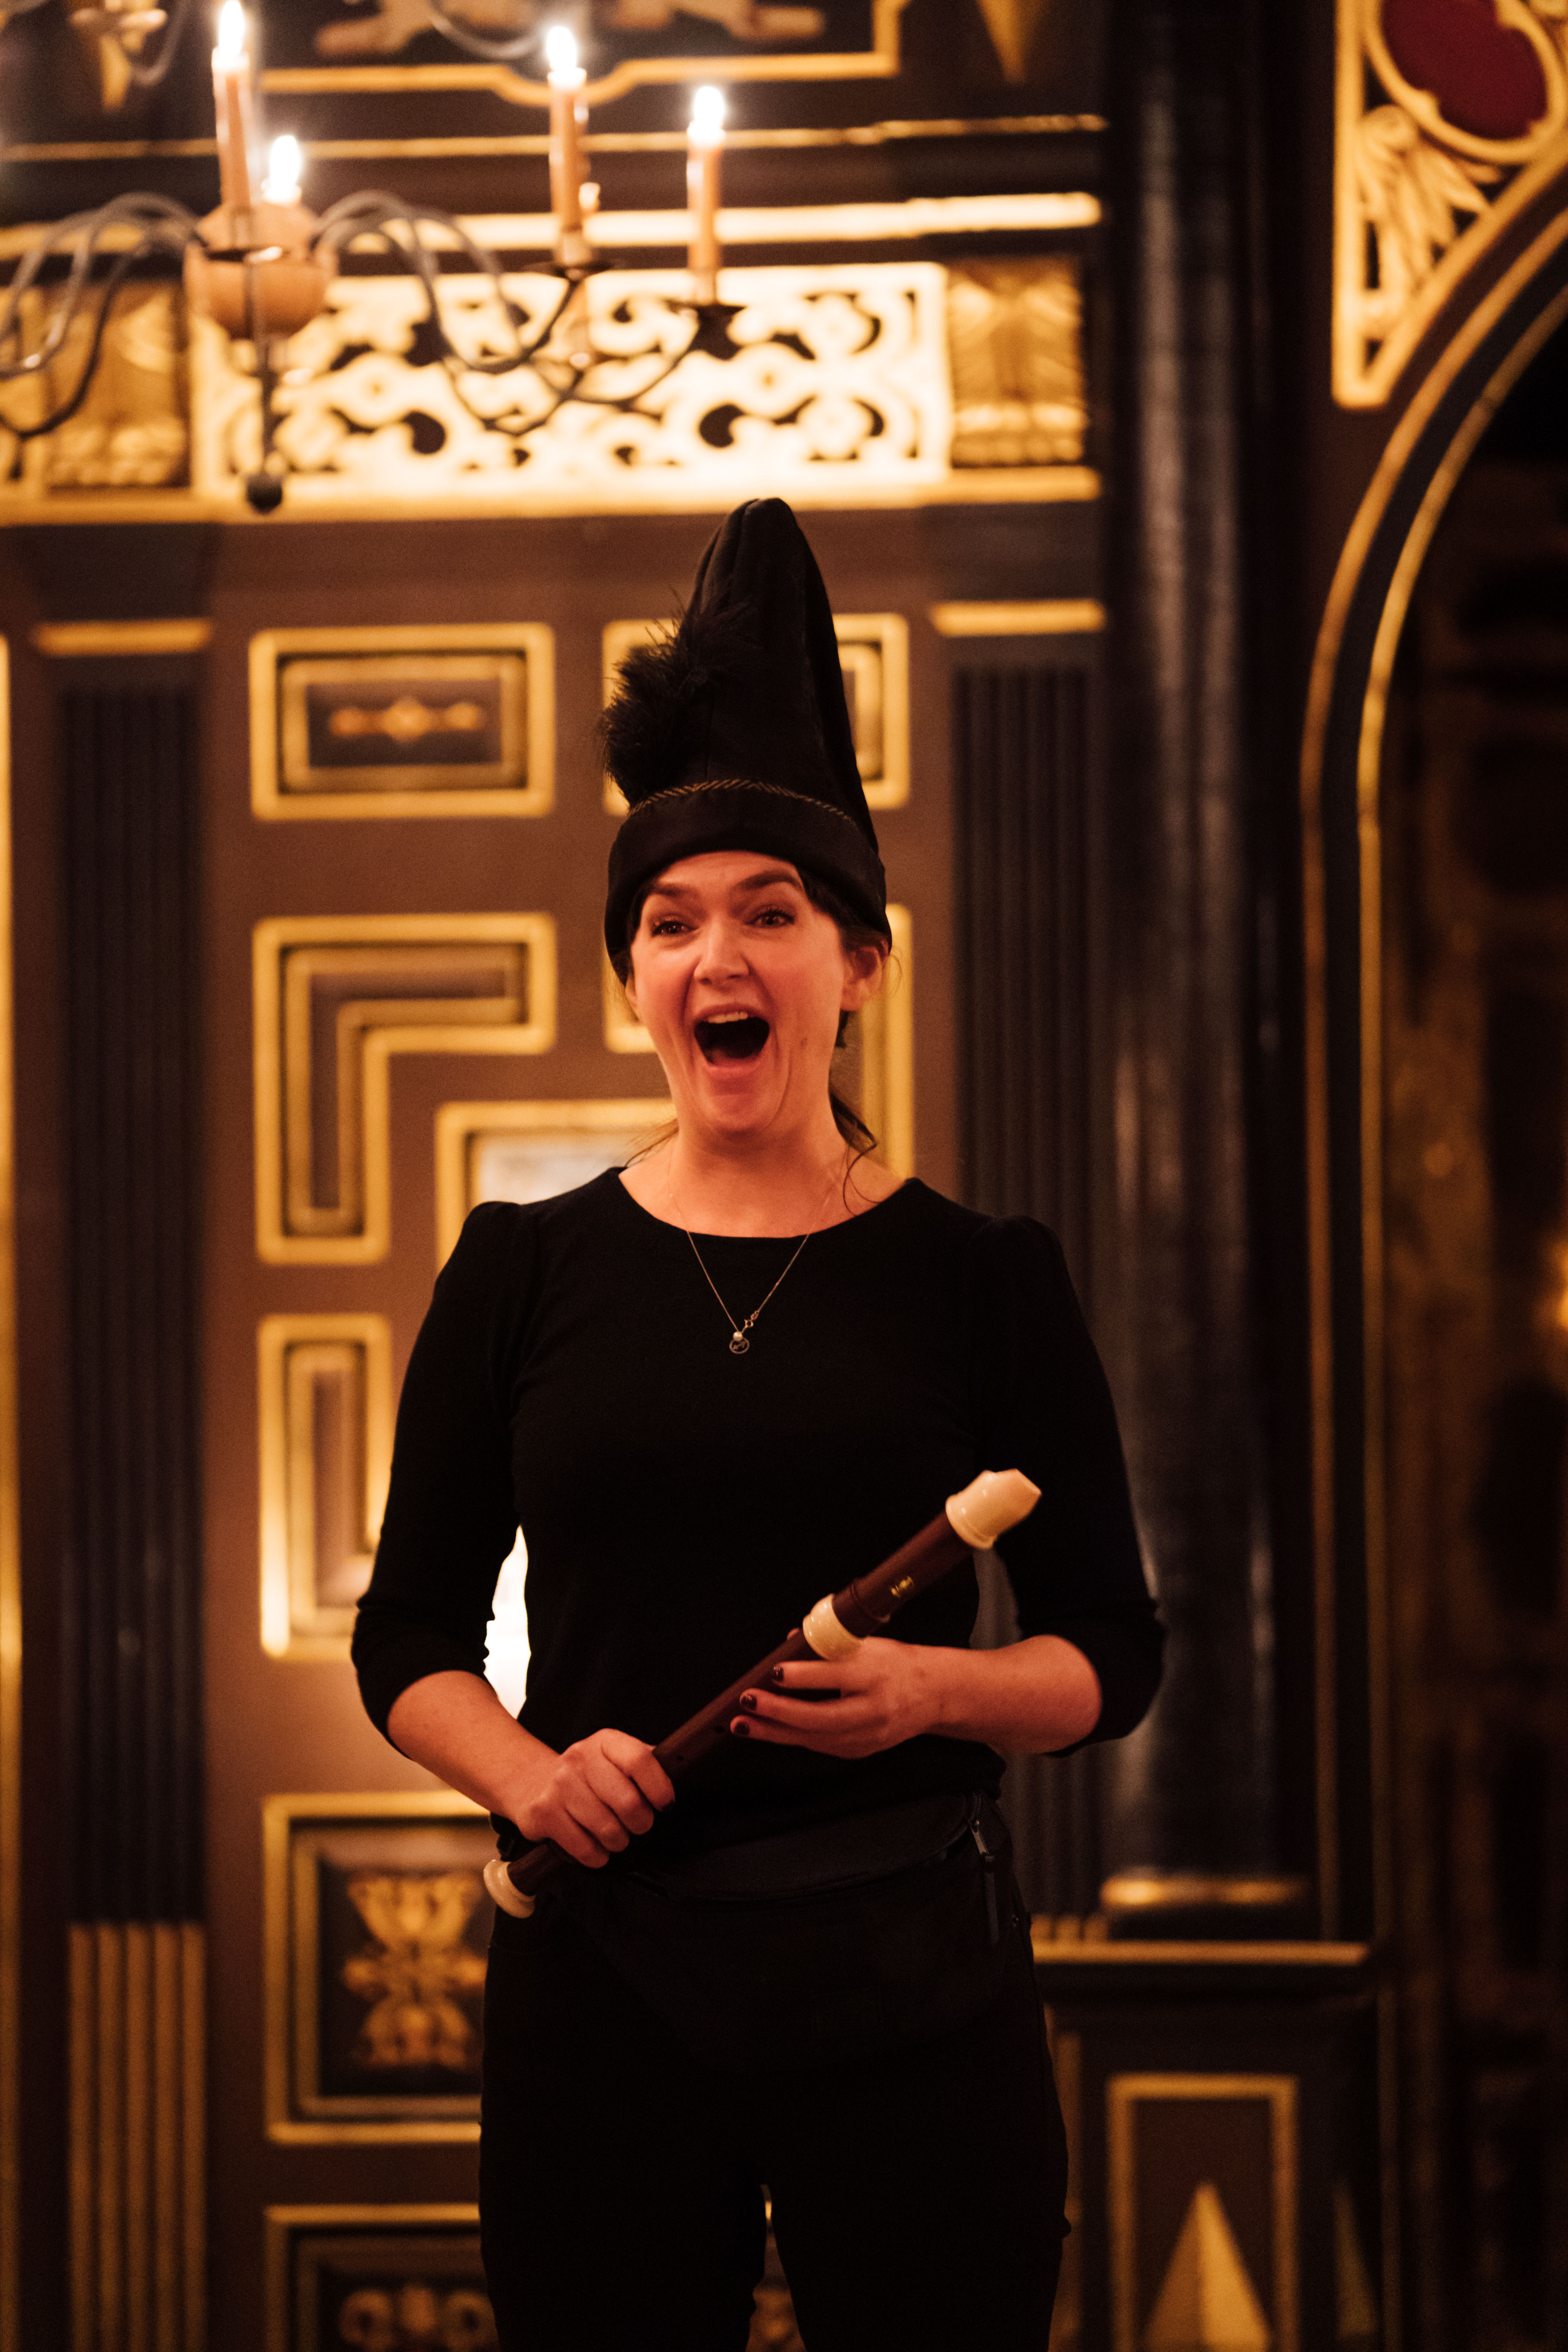 Rachael in black pointy hat, black top and trousers holding a recorder and looking excited